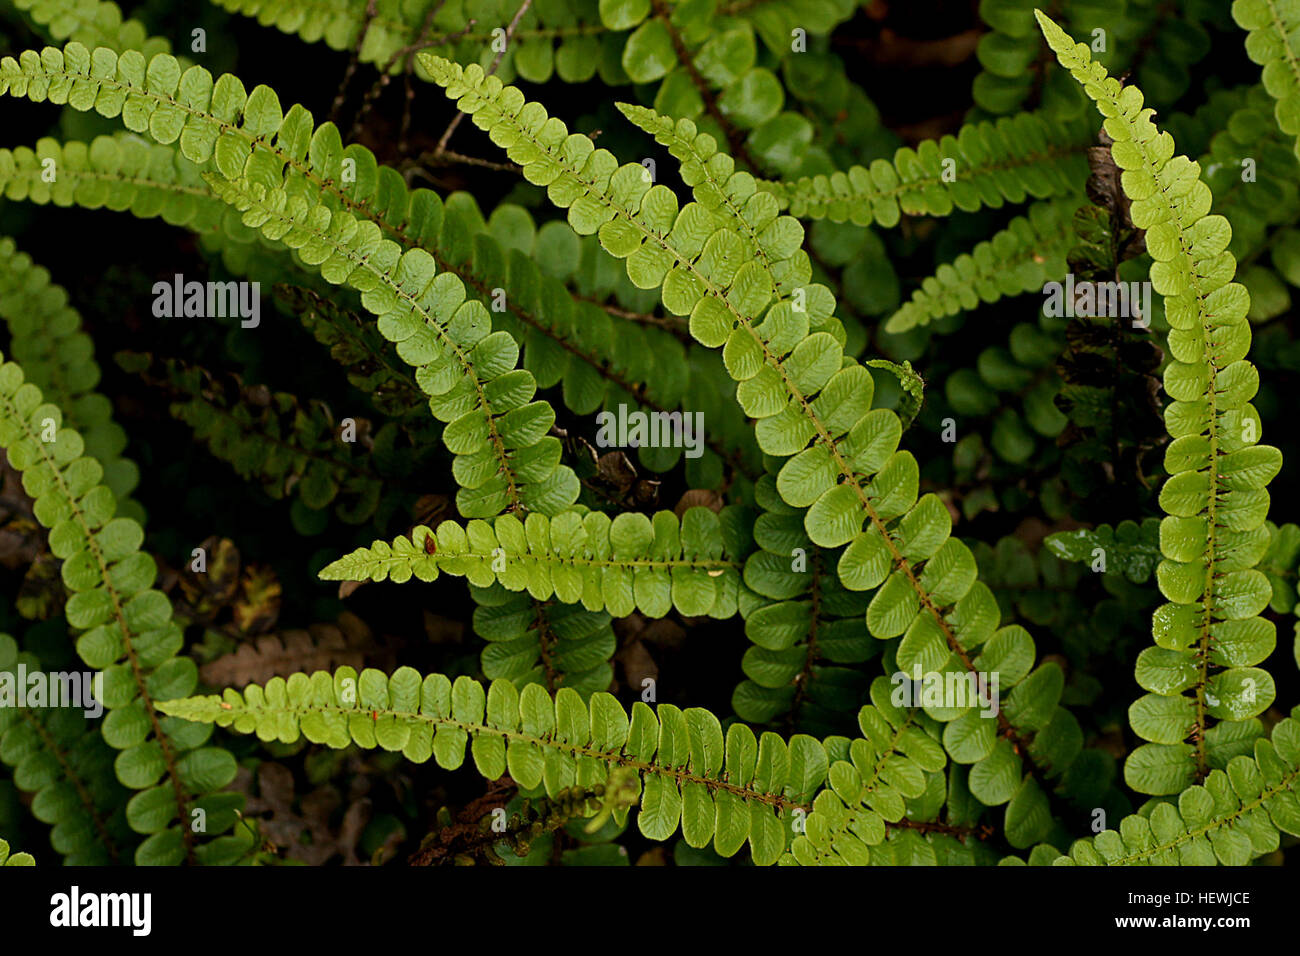 Blechnum penna-marina is a native alpine water fern that can grow in conditions down to -25°C. It natural range in New Zealand is the North, South, Stewart, Chatham, Antipodes, Auckland, Campbell Islands and the Macaquarie Island. Its habitat is coastal to alpine in open forest, subalpine scrub, grassland, alpine herbfield, and in moss field on the shaded sites of rock outcrops. It mostly montane to alpine in the northern part of range, and is scarce north of the Bay of Plenty and the Waikato. It is present on Mt Egmont/Taranaki. It also grows in Australia, some Pacific islands, South America. Stock Photo